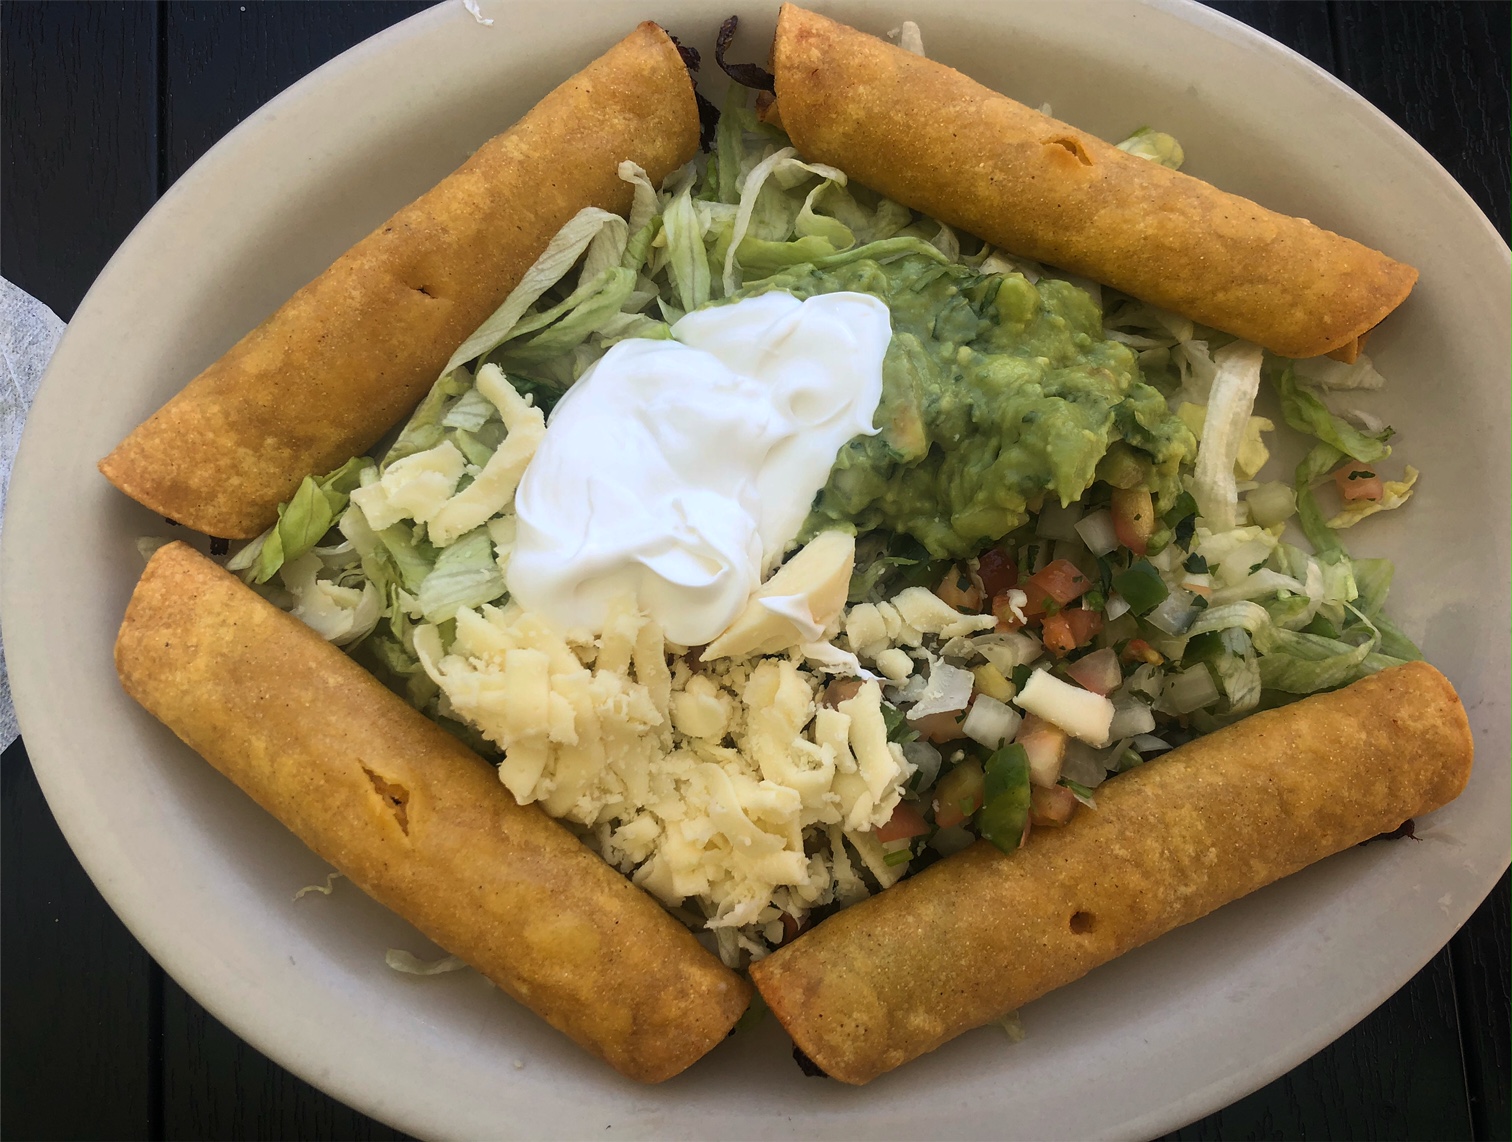 On a white oval plate, there are four flautas in a ring, and inside, there are toppings like sour cream, pico de gallo, grated white cheese, and guacamole. Photo by Alyssa Buckley.